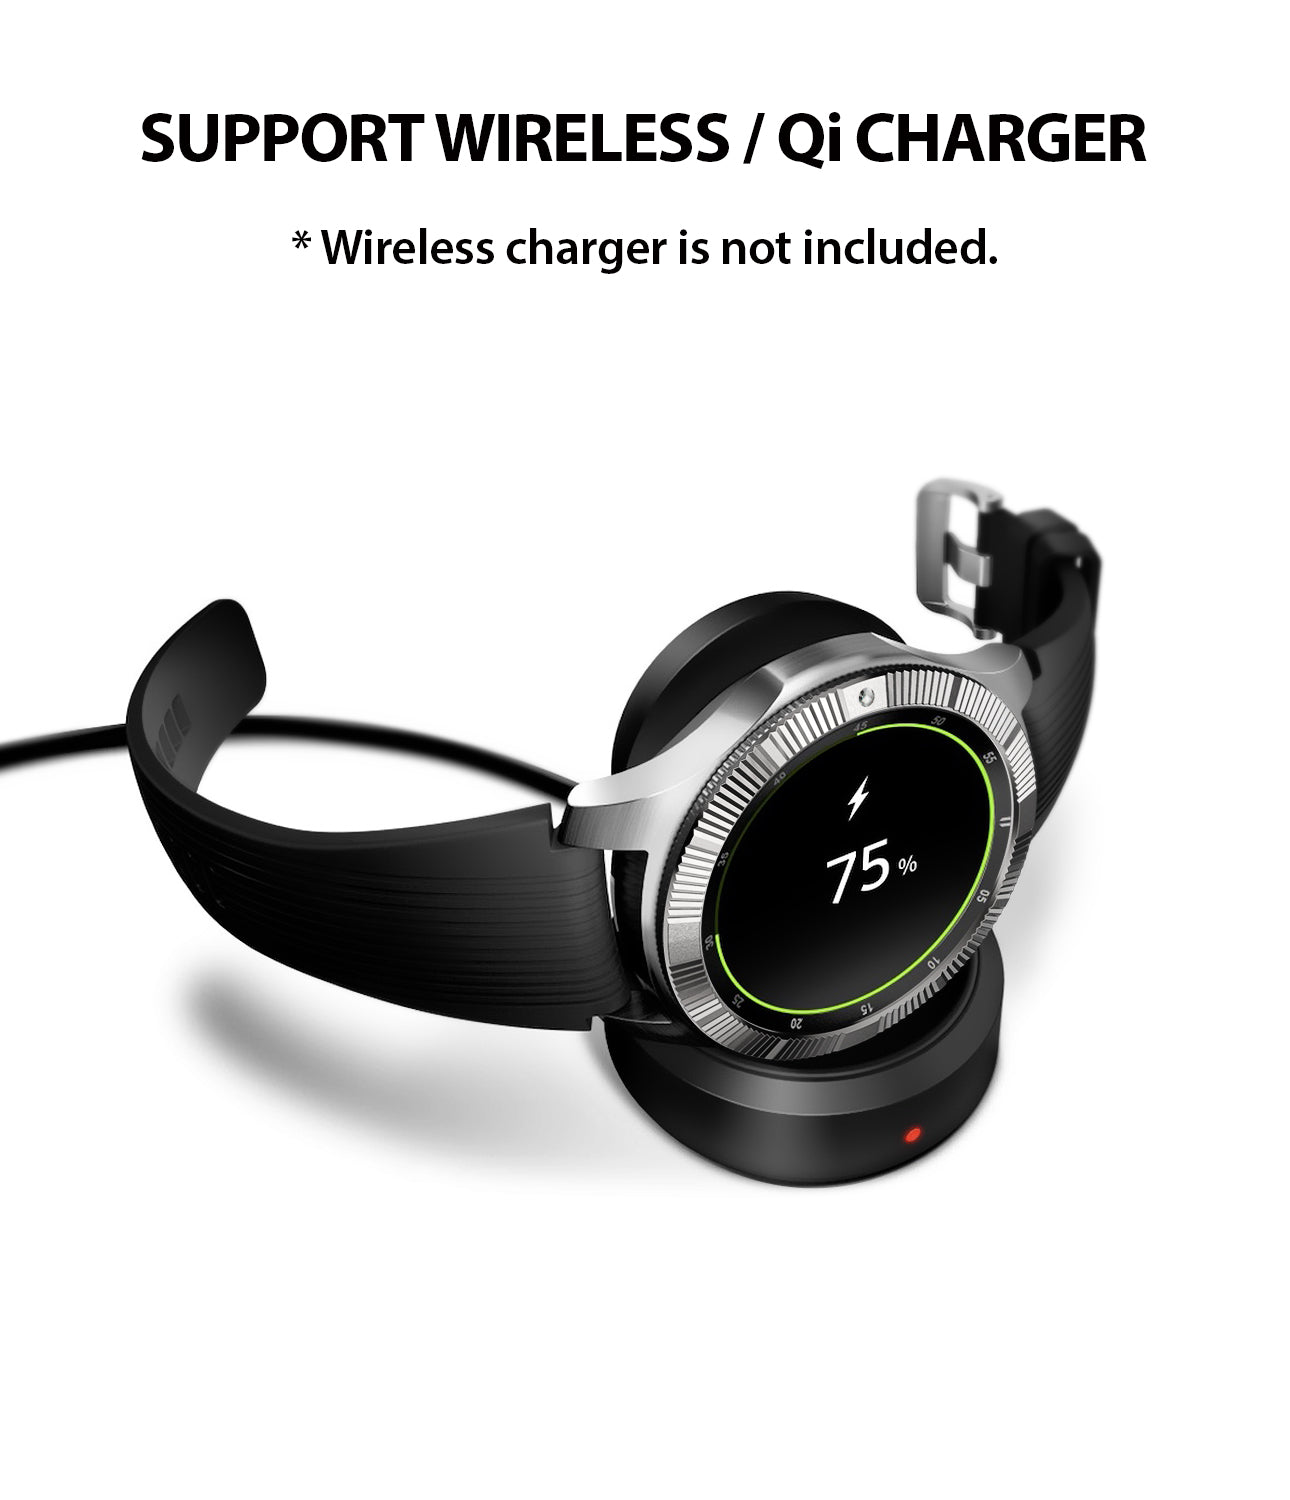 ringke bezel styling supports wireless, qi charging without removing the case